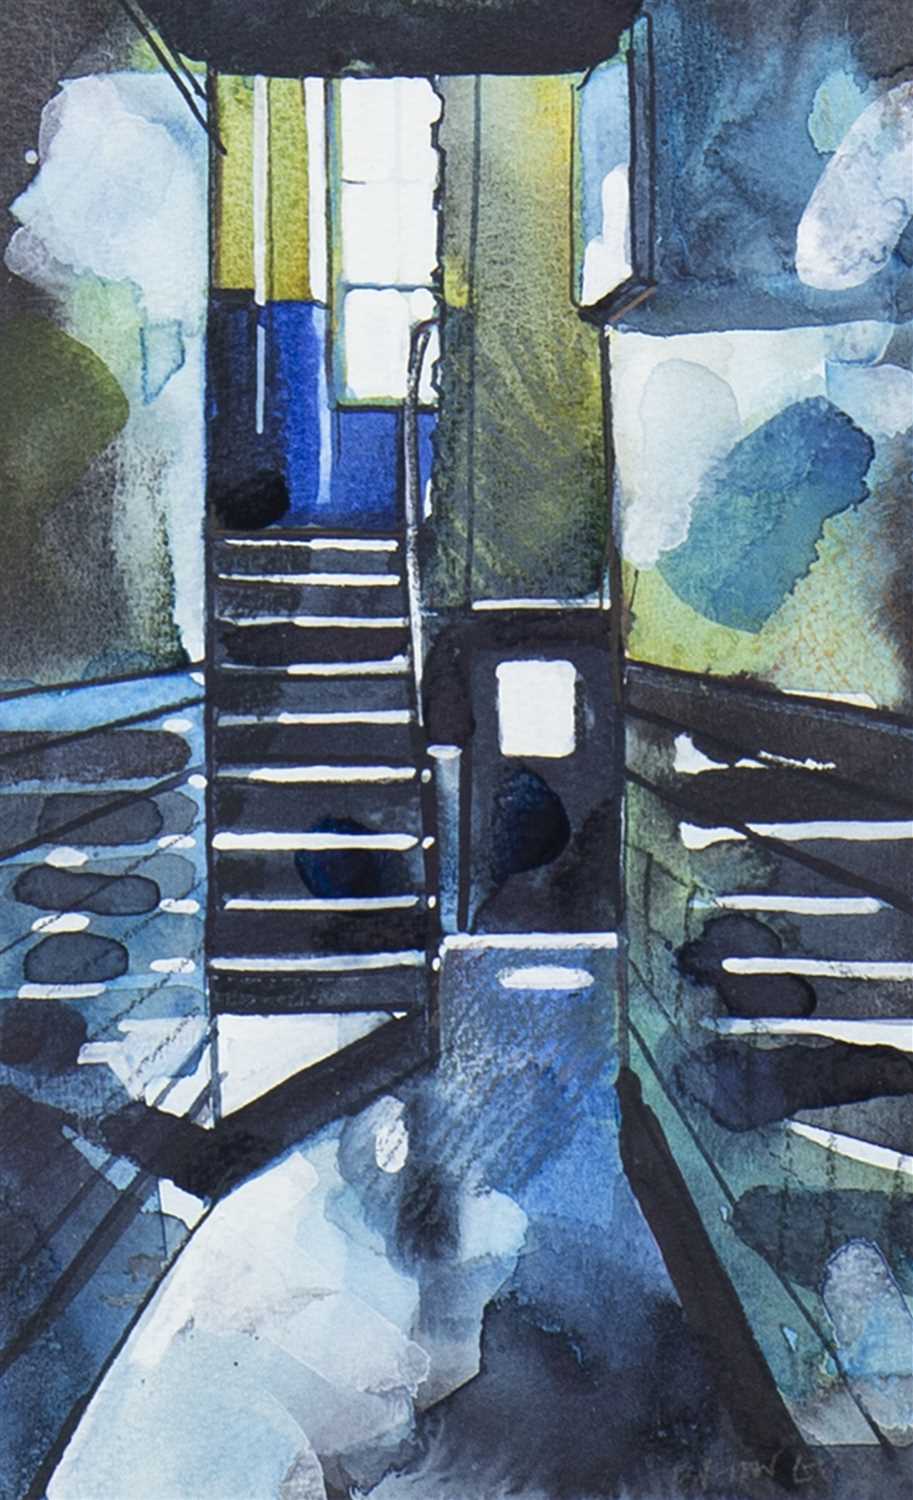 Lot 627 - SHADES OF BLUE AND GREY, A WATERCOLOUR BY BRYAN EVANS